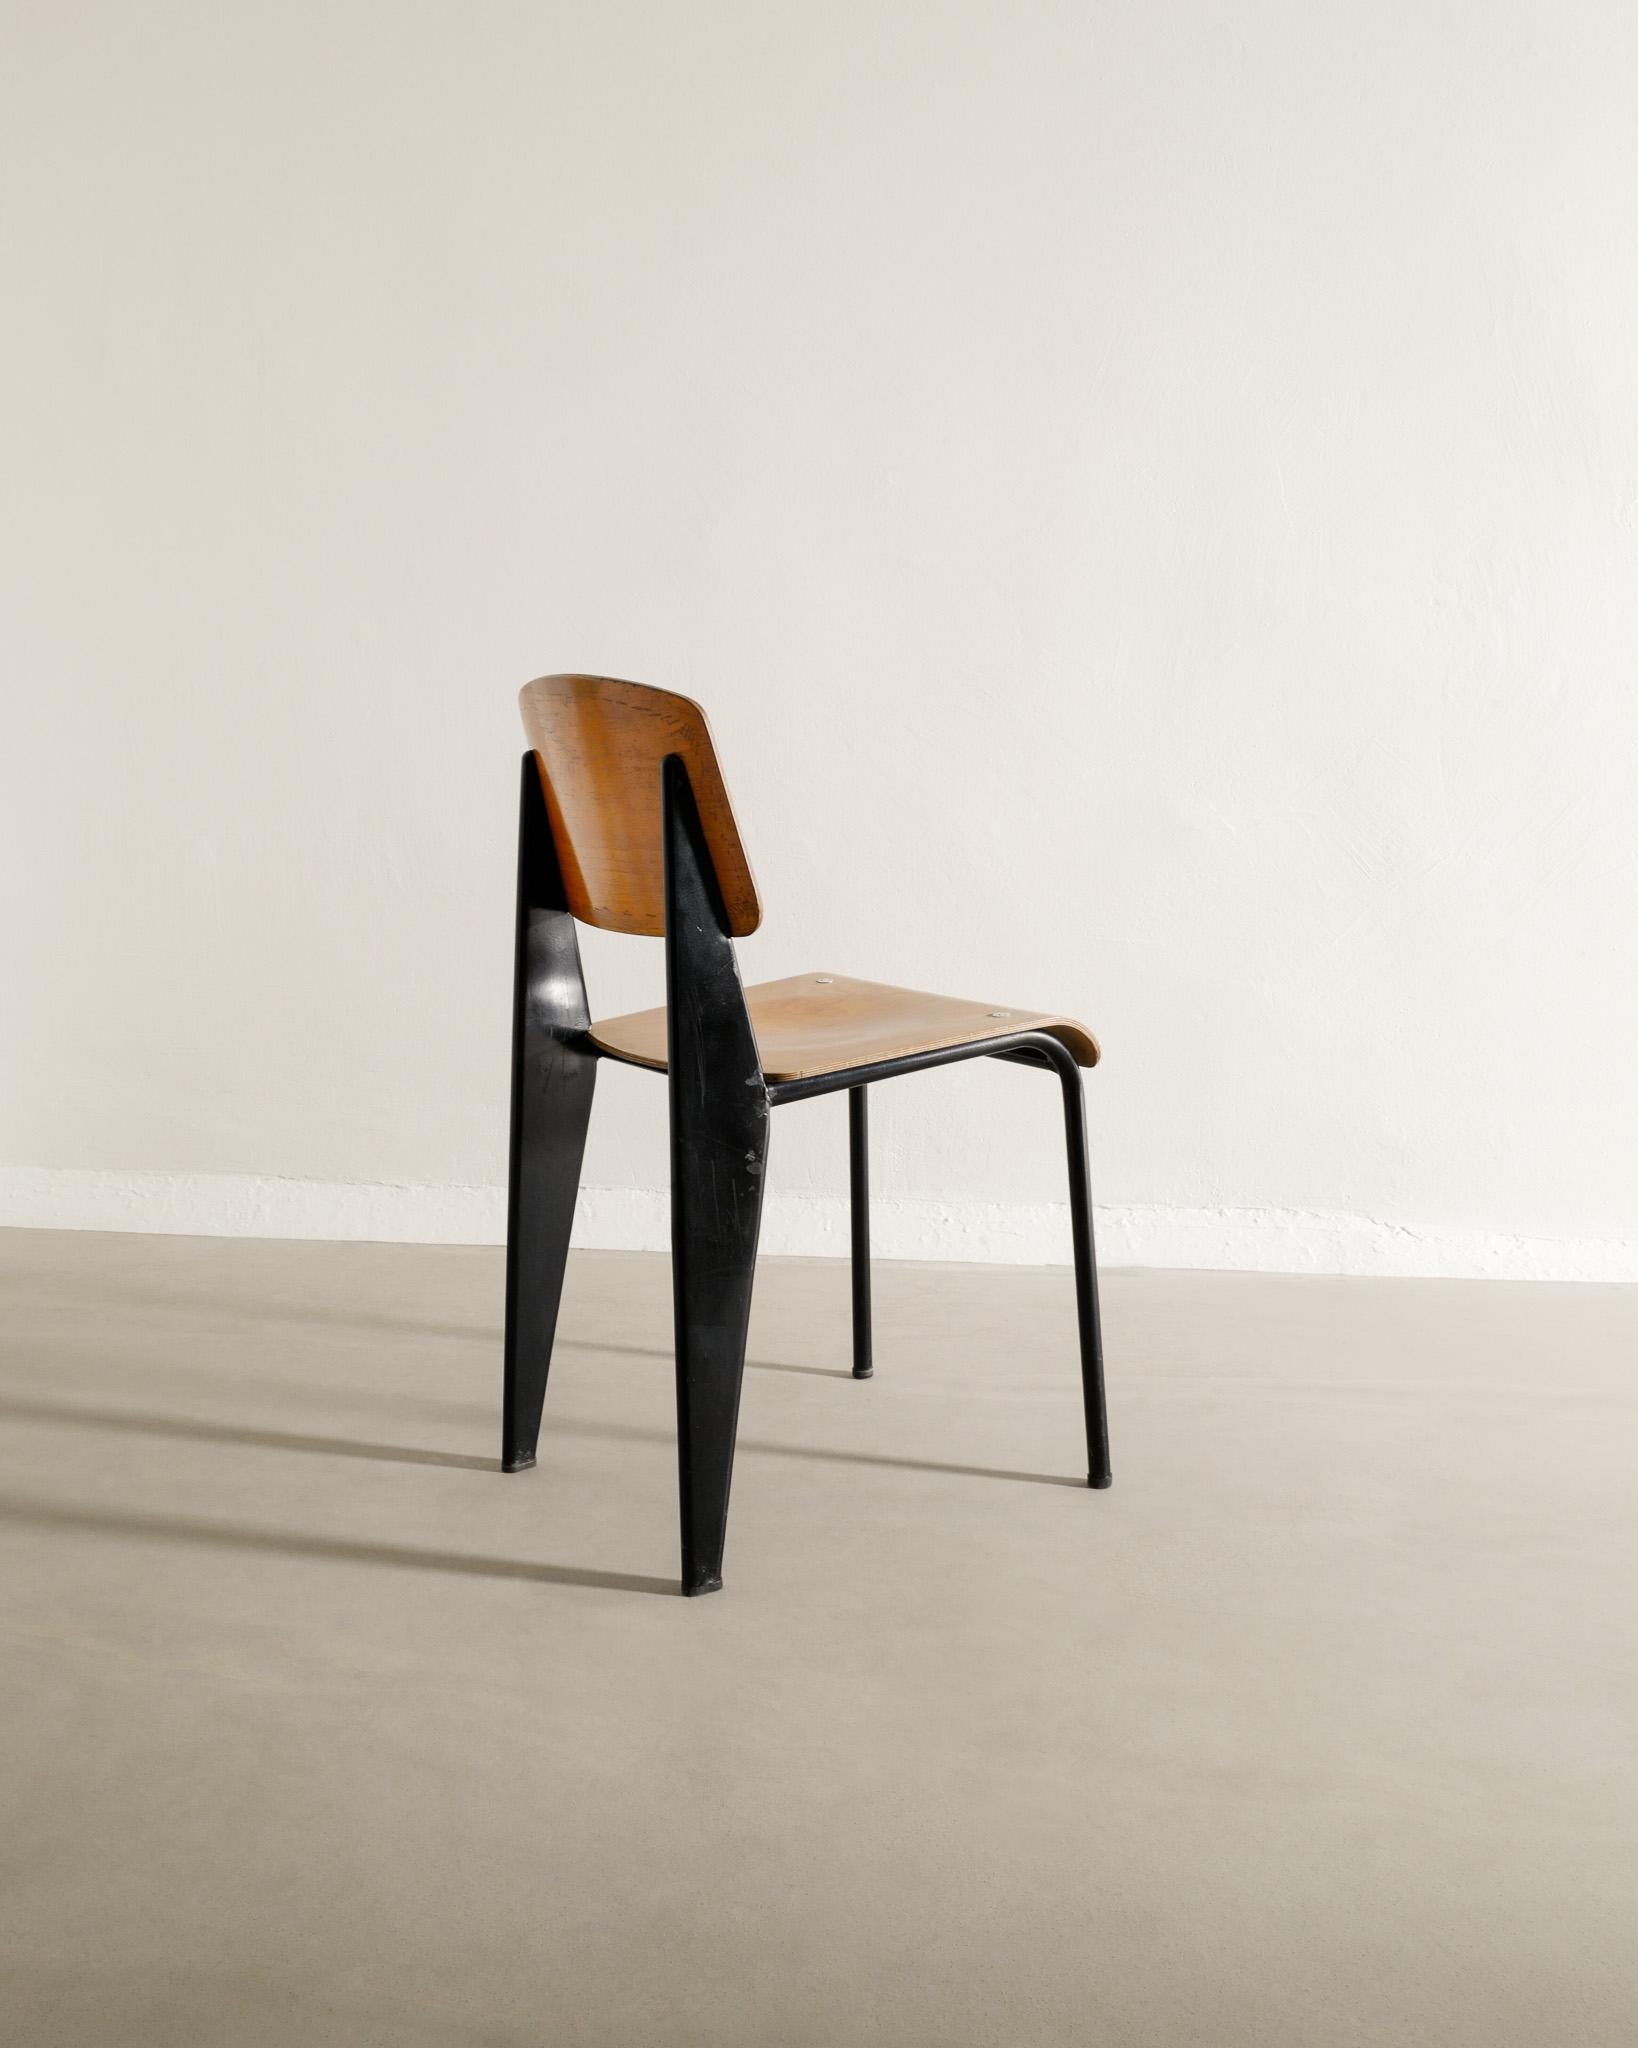 jean prouve chairs